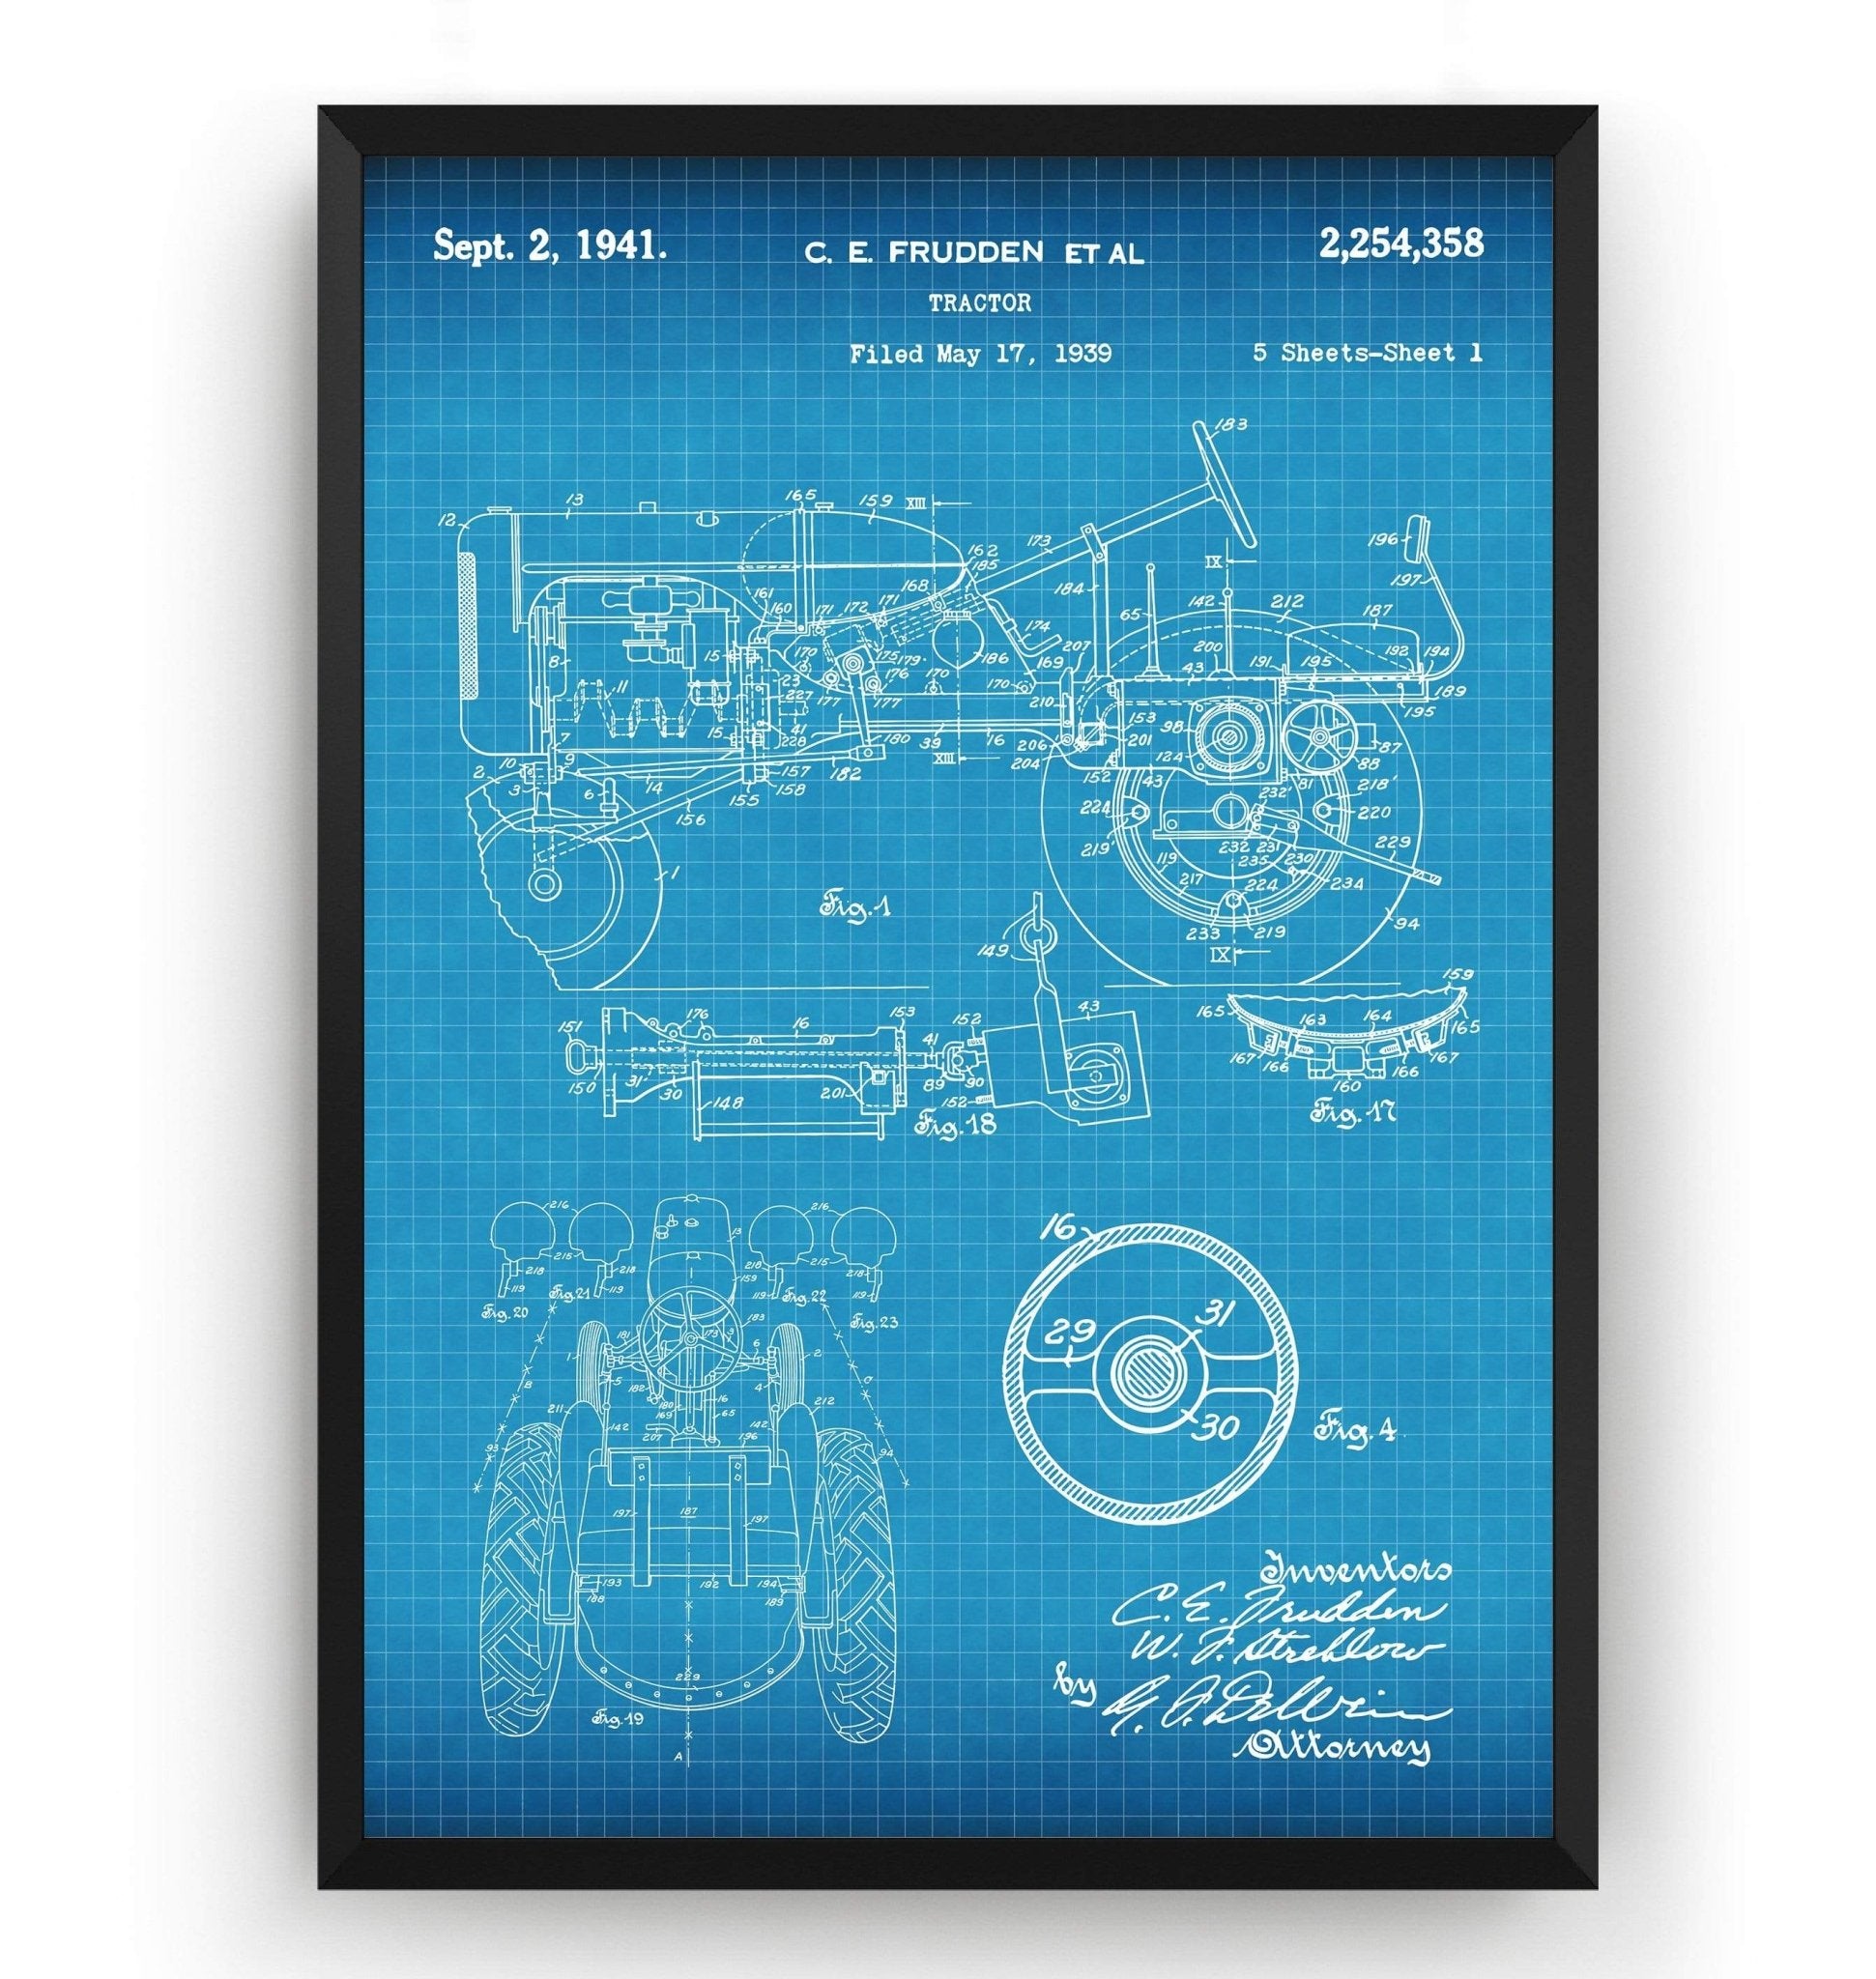 Allis-Chalmers Tractor 1941 Patent Print - Magic Posters